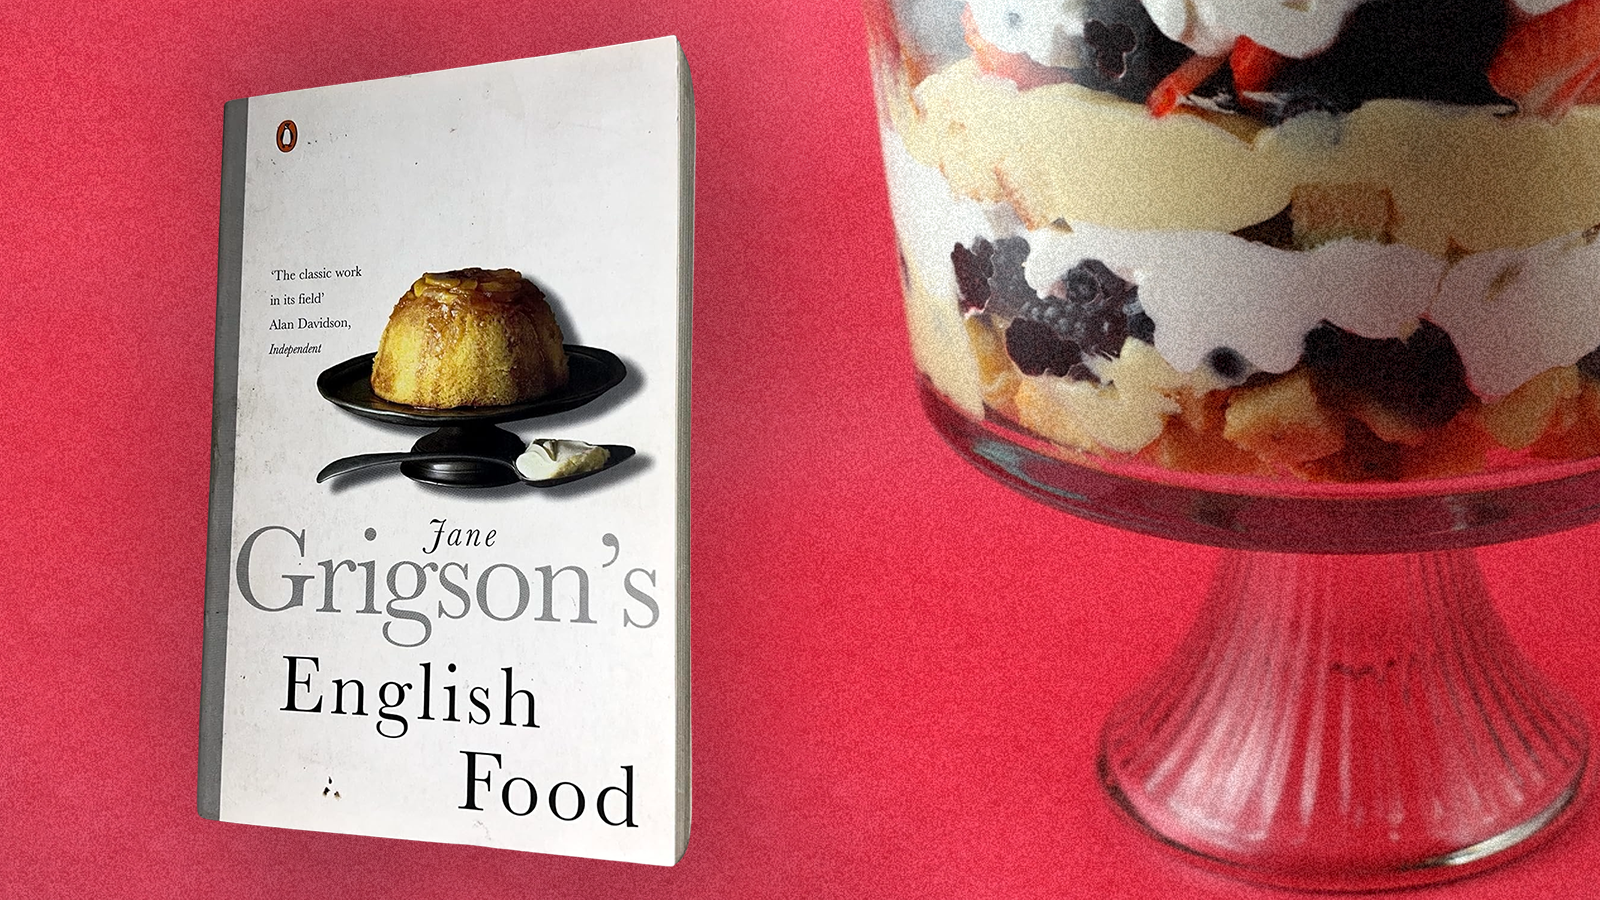 The cover of Jane Grigson’s English Food next to a layered trifle in a glass serving dish. Photo illustration.